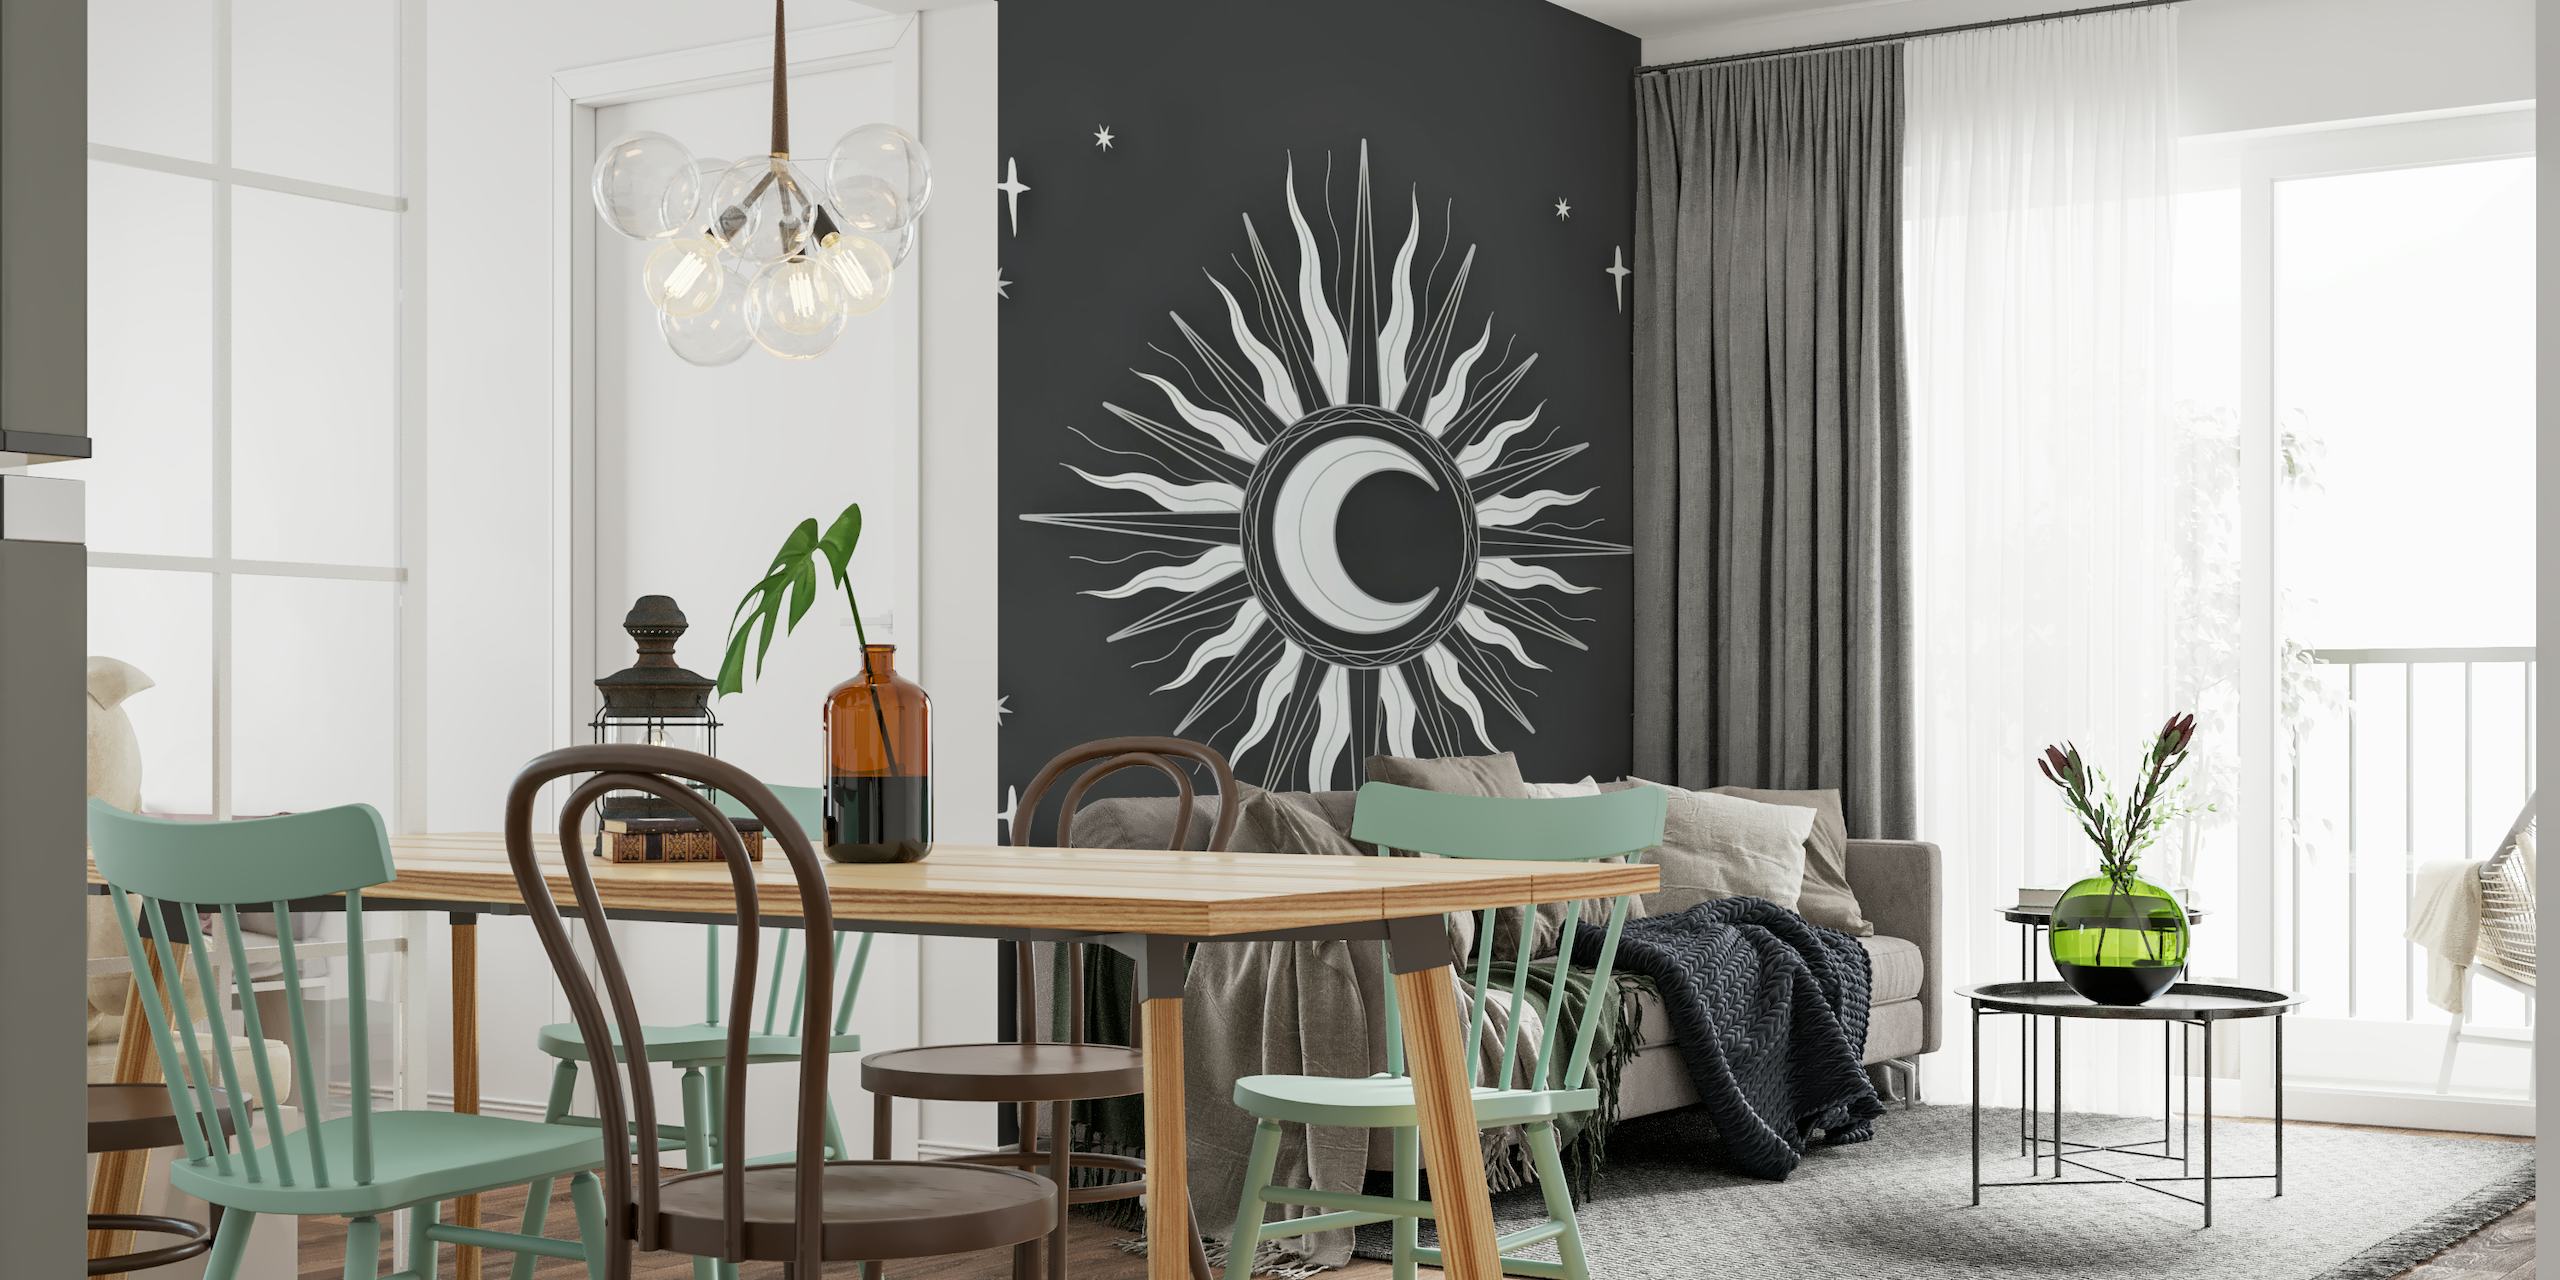 Boho Moon wall mural with a stylized crescent moon and sun radiance on a dark background.